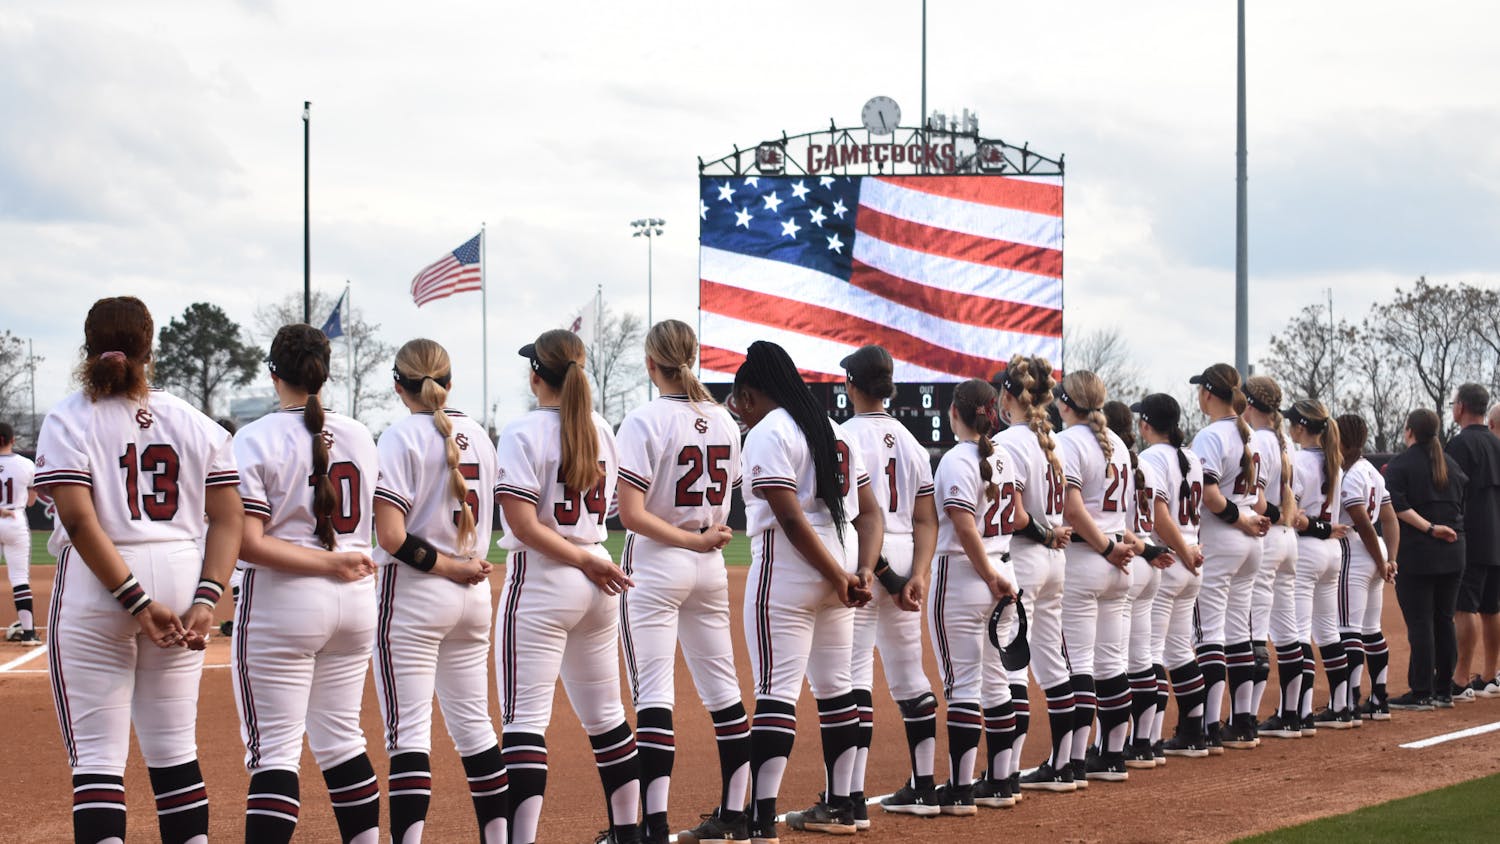 The South Carolina softball team stands together during the Pledge of Allegiance at the start of its first game in the Carolina Classic against East Tennessee State on Feb. 16, 2023. The Gamecocks started the tournament with a 9-2 win over the Buccaneers.&nbsp;